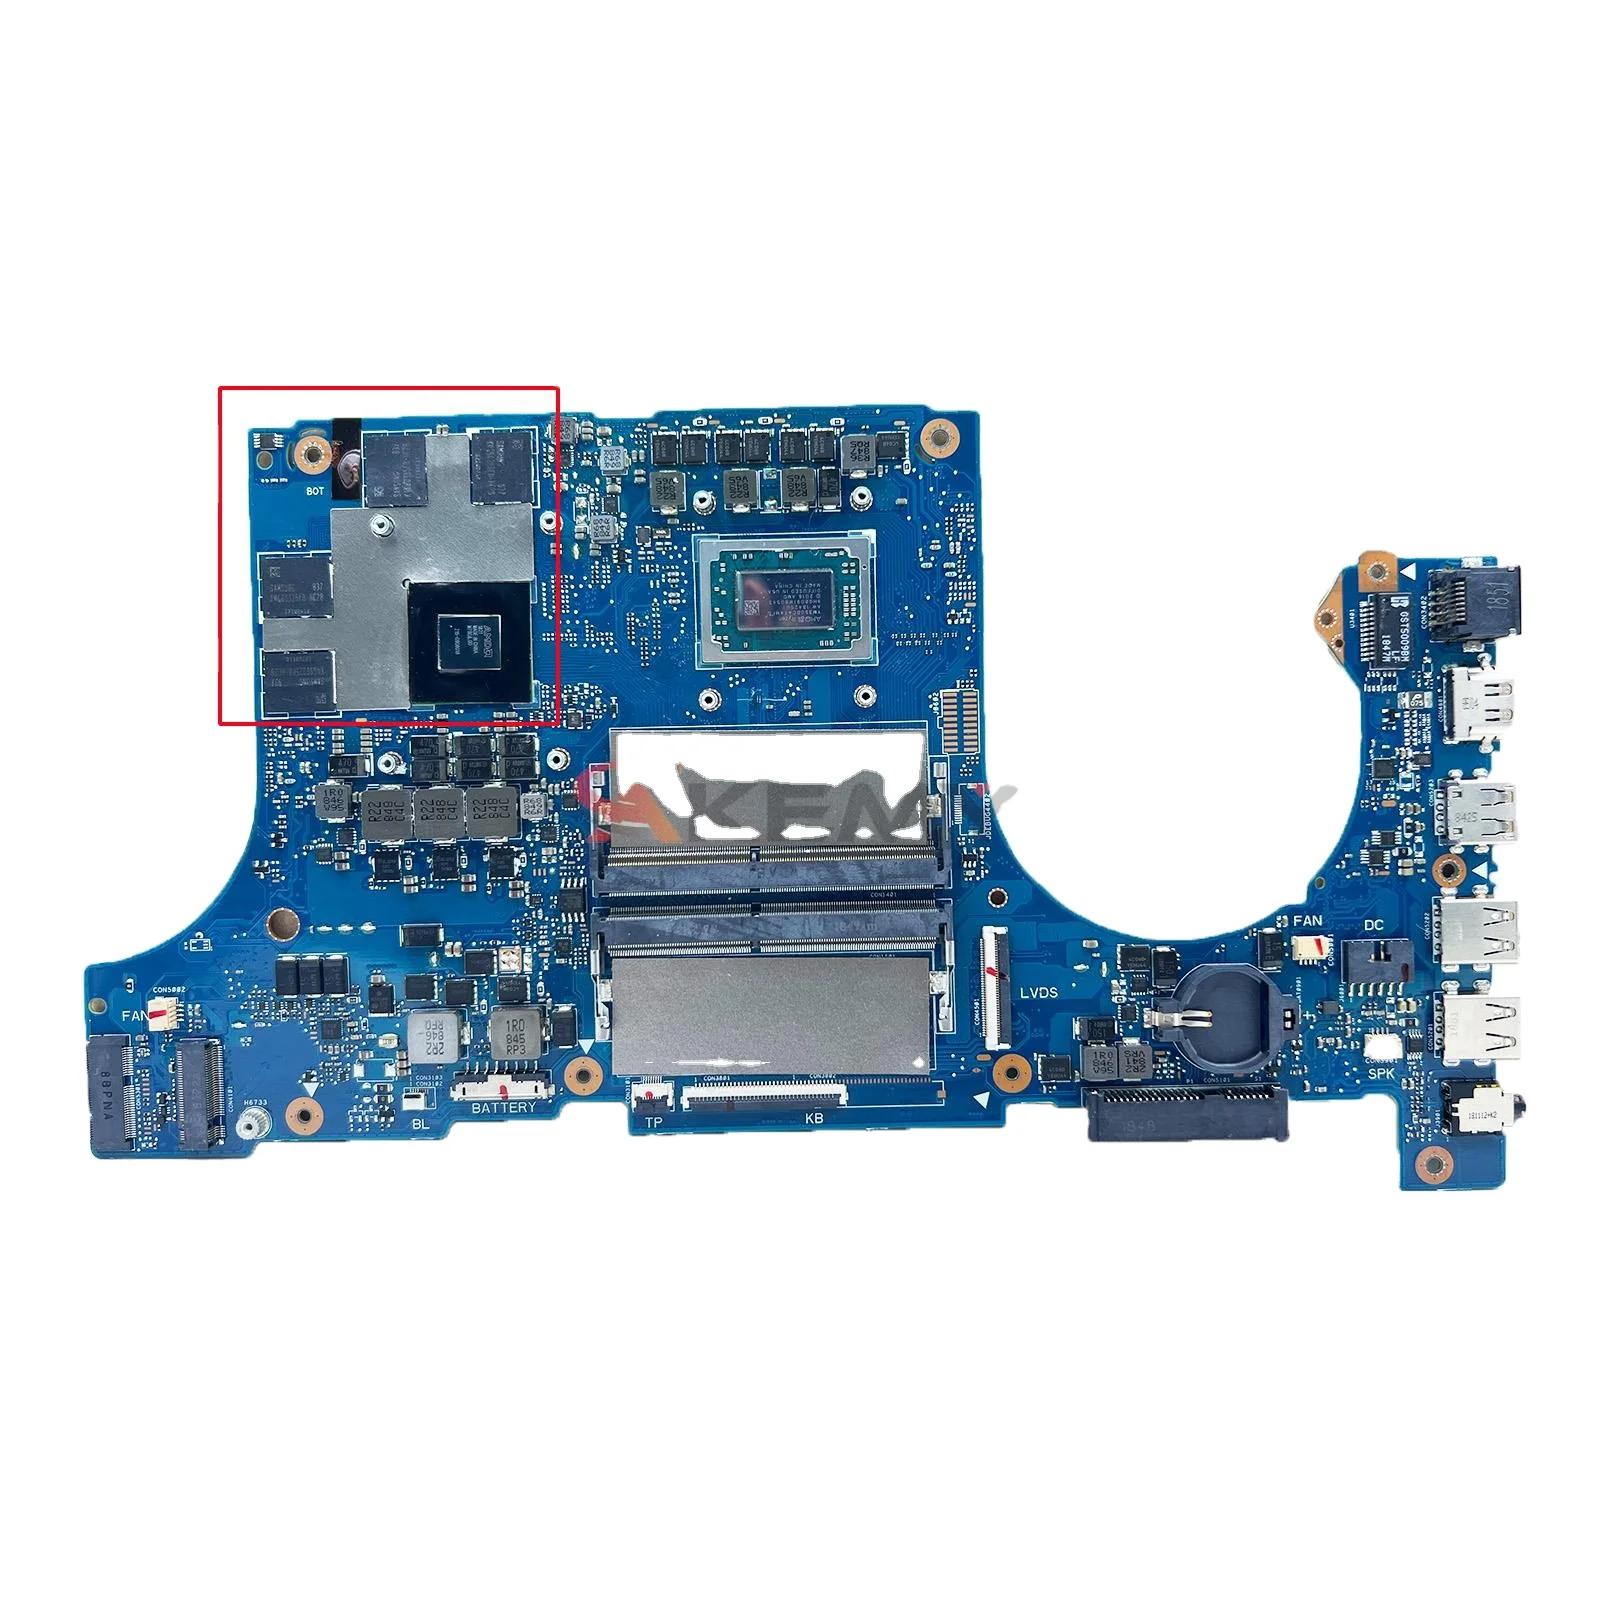 

FX705DY FX505DY Laptop Motherboard For ASUS TUF Game FX95D FX505D FX505DY FX705DY Notebook Mainboard RX 560X R5-3550H R7-3750H